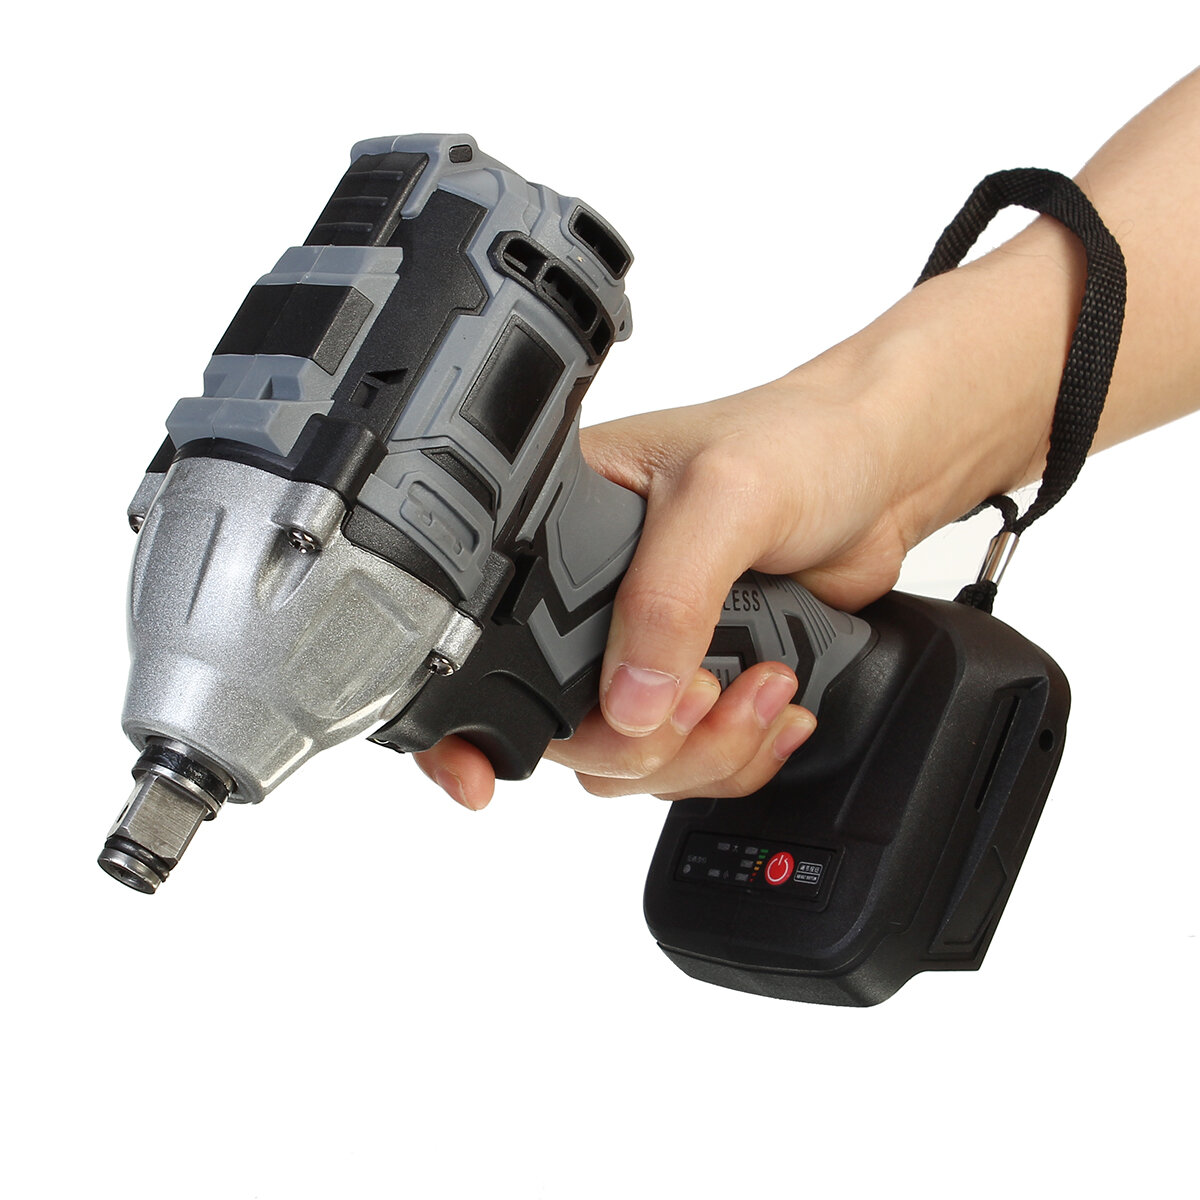 

18V Brushless Wrench Electric Impact Wrench Driver Cordless Screwdriver 1/2 Inch Chuck Adapted To Makita Battery